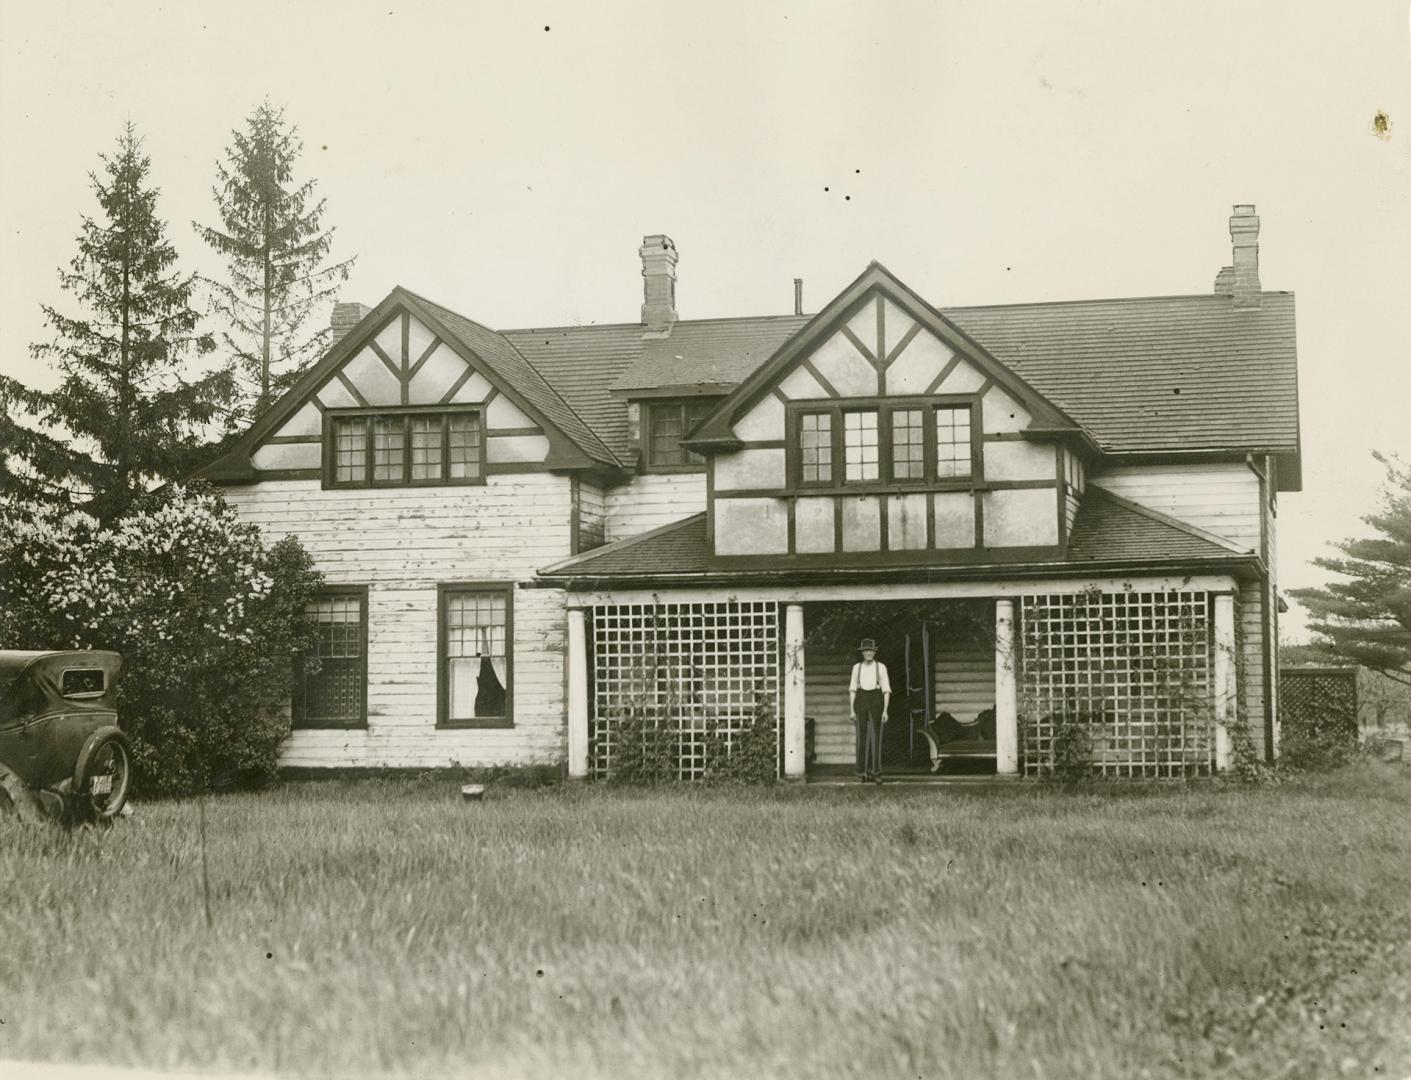 The Hellmer House at Clarkson